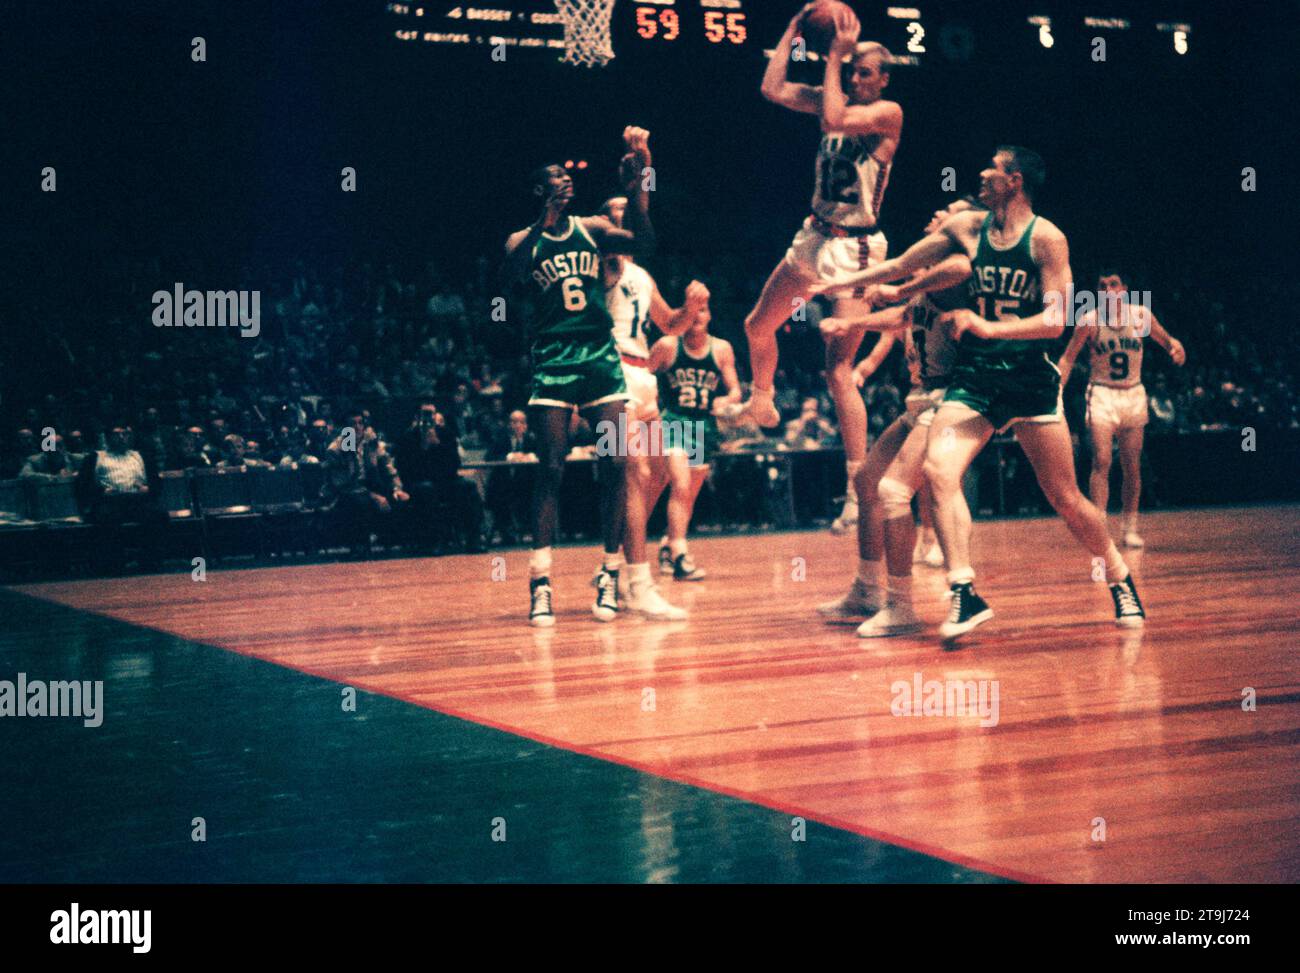 NEW YORK, NY - OCTOBER 25: Kenny Sears #12 of the New York Knicks grabs the rebound away from Bill Russell #6 and Tom Heinsohn #15 of the Boston Celtics during an NBA game on October 25, 1958 at the Madison Square Garden in New York, New York.  (Photo by Hy Peskin) *** Local Caption *** Kenny Sears;Bill Russell;Tom Heinsohn Stock Photo